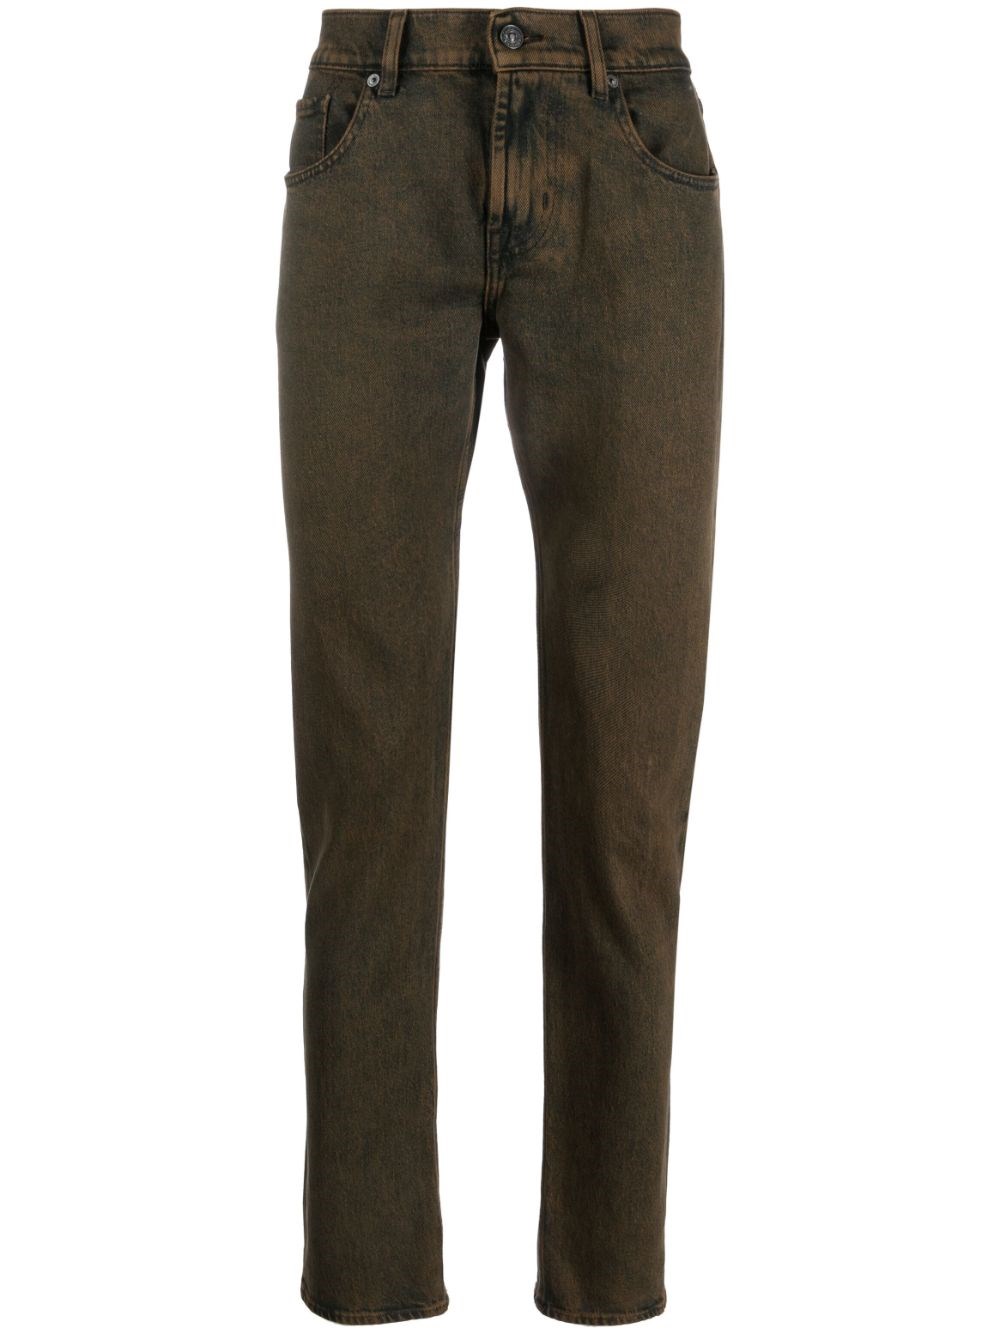 7 FOR ALL MANKIND `SLIMMY TAPERED FIGURE OUT` JEANS